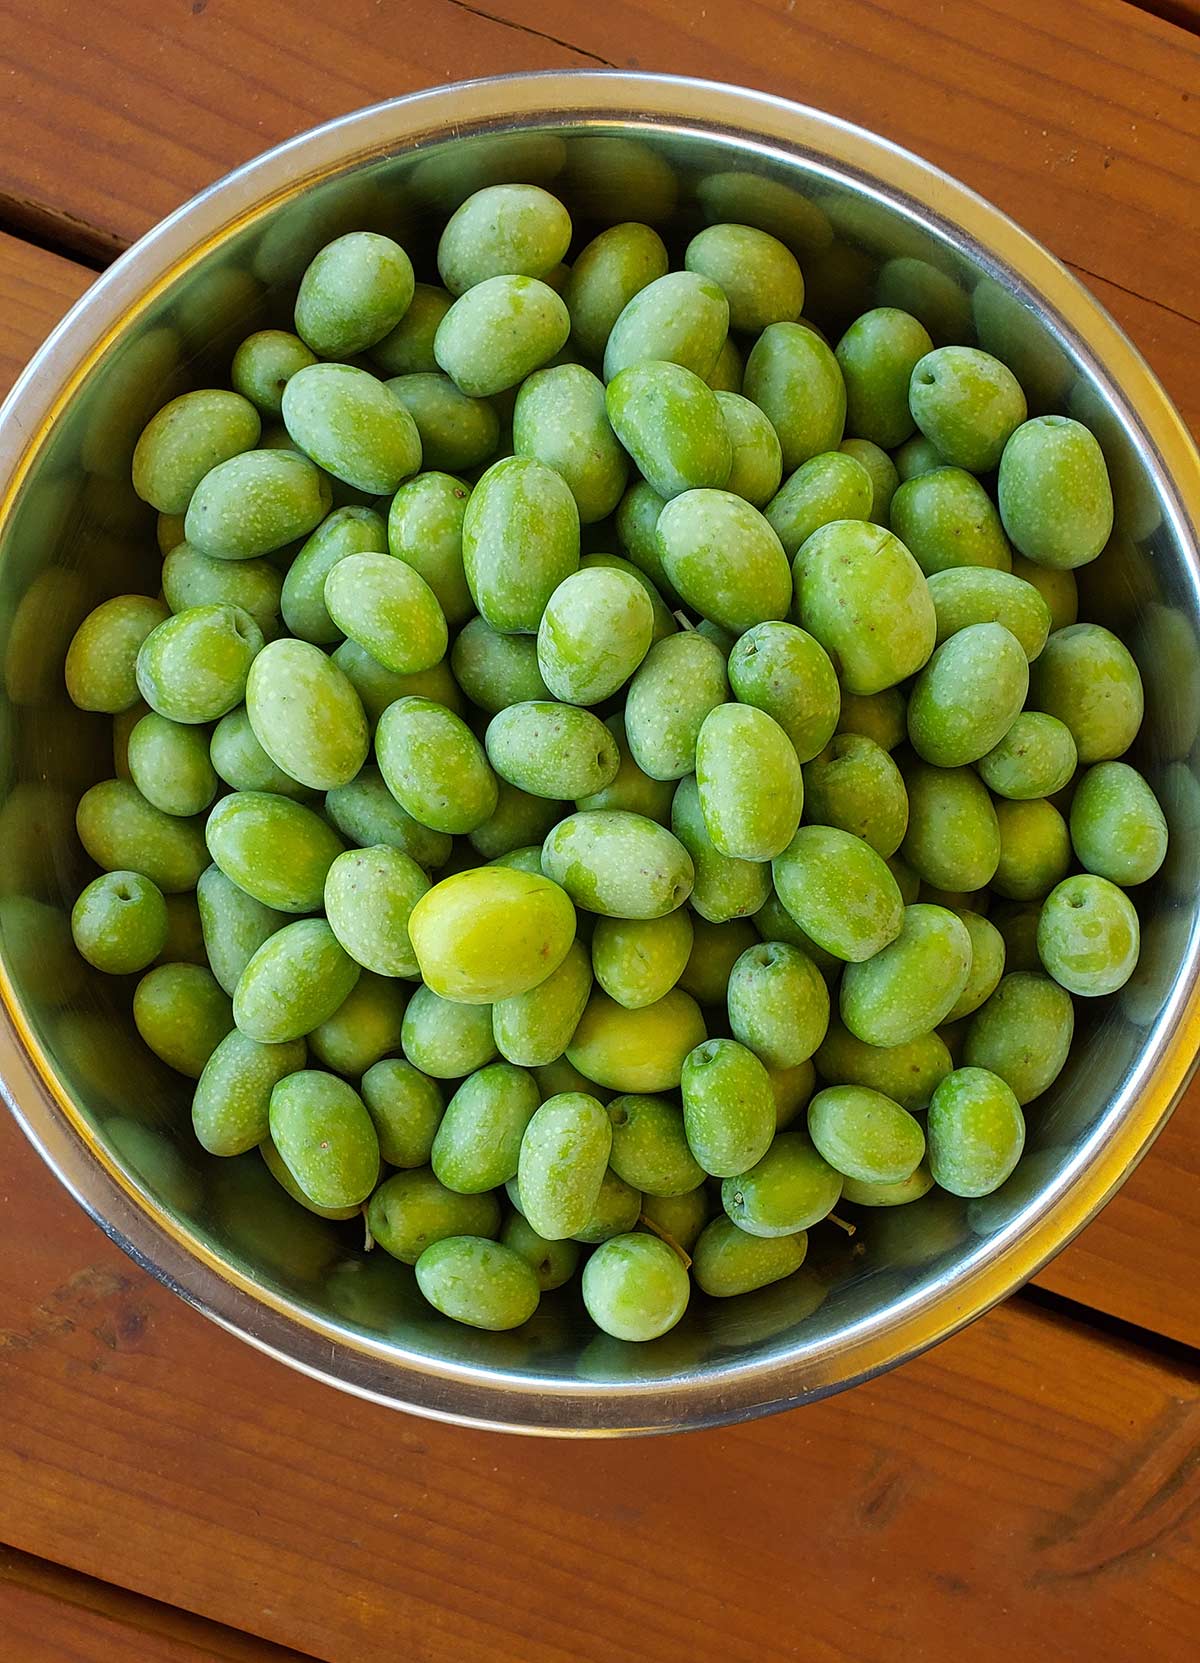 A bowl of green olives